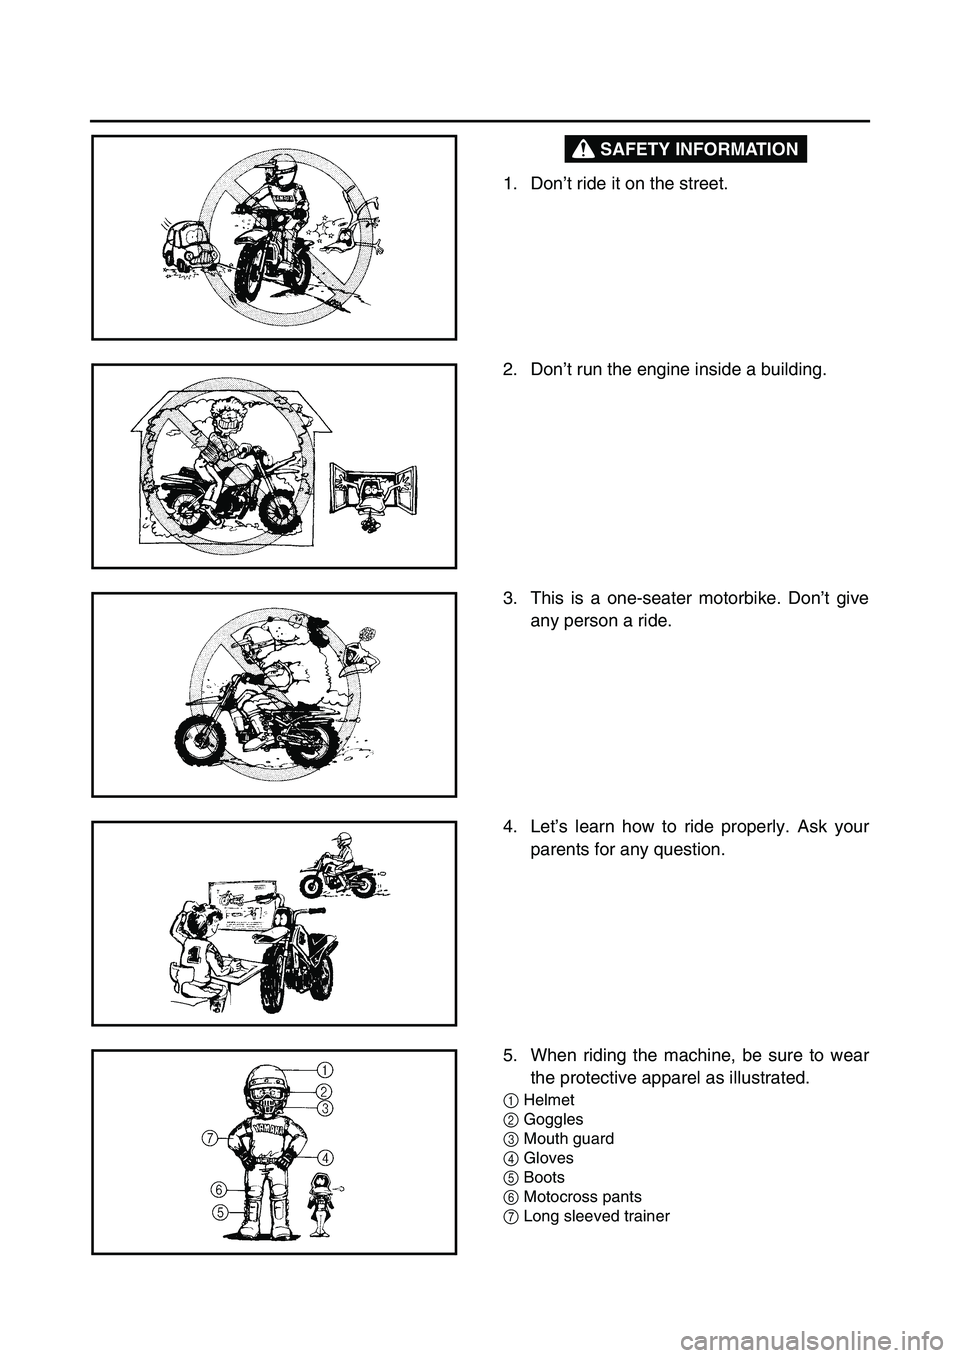 YAMAHA TTR90 2006  Notices Demploi (in French) SAFETY INFORMATION
1. Don’t ride it on the street.
2. Don’t run the engine inside a building.
3. This is a one-seater motorbike. Don’t give
any person a ride.
4. Let’s learn how to ride proper